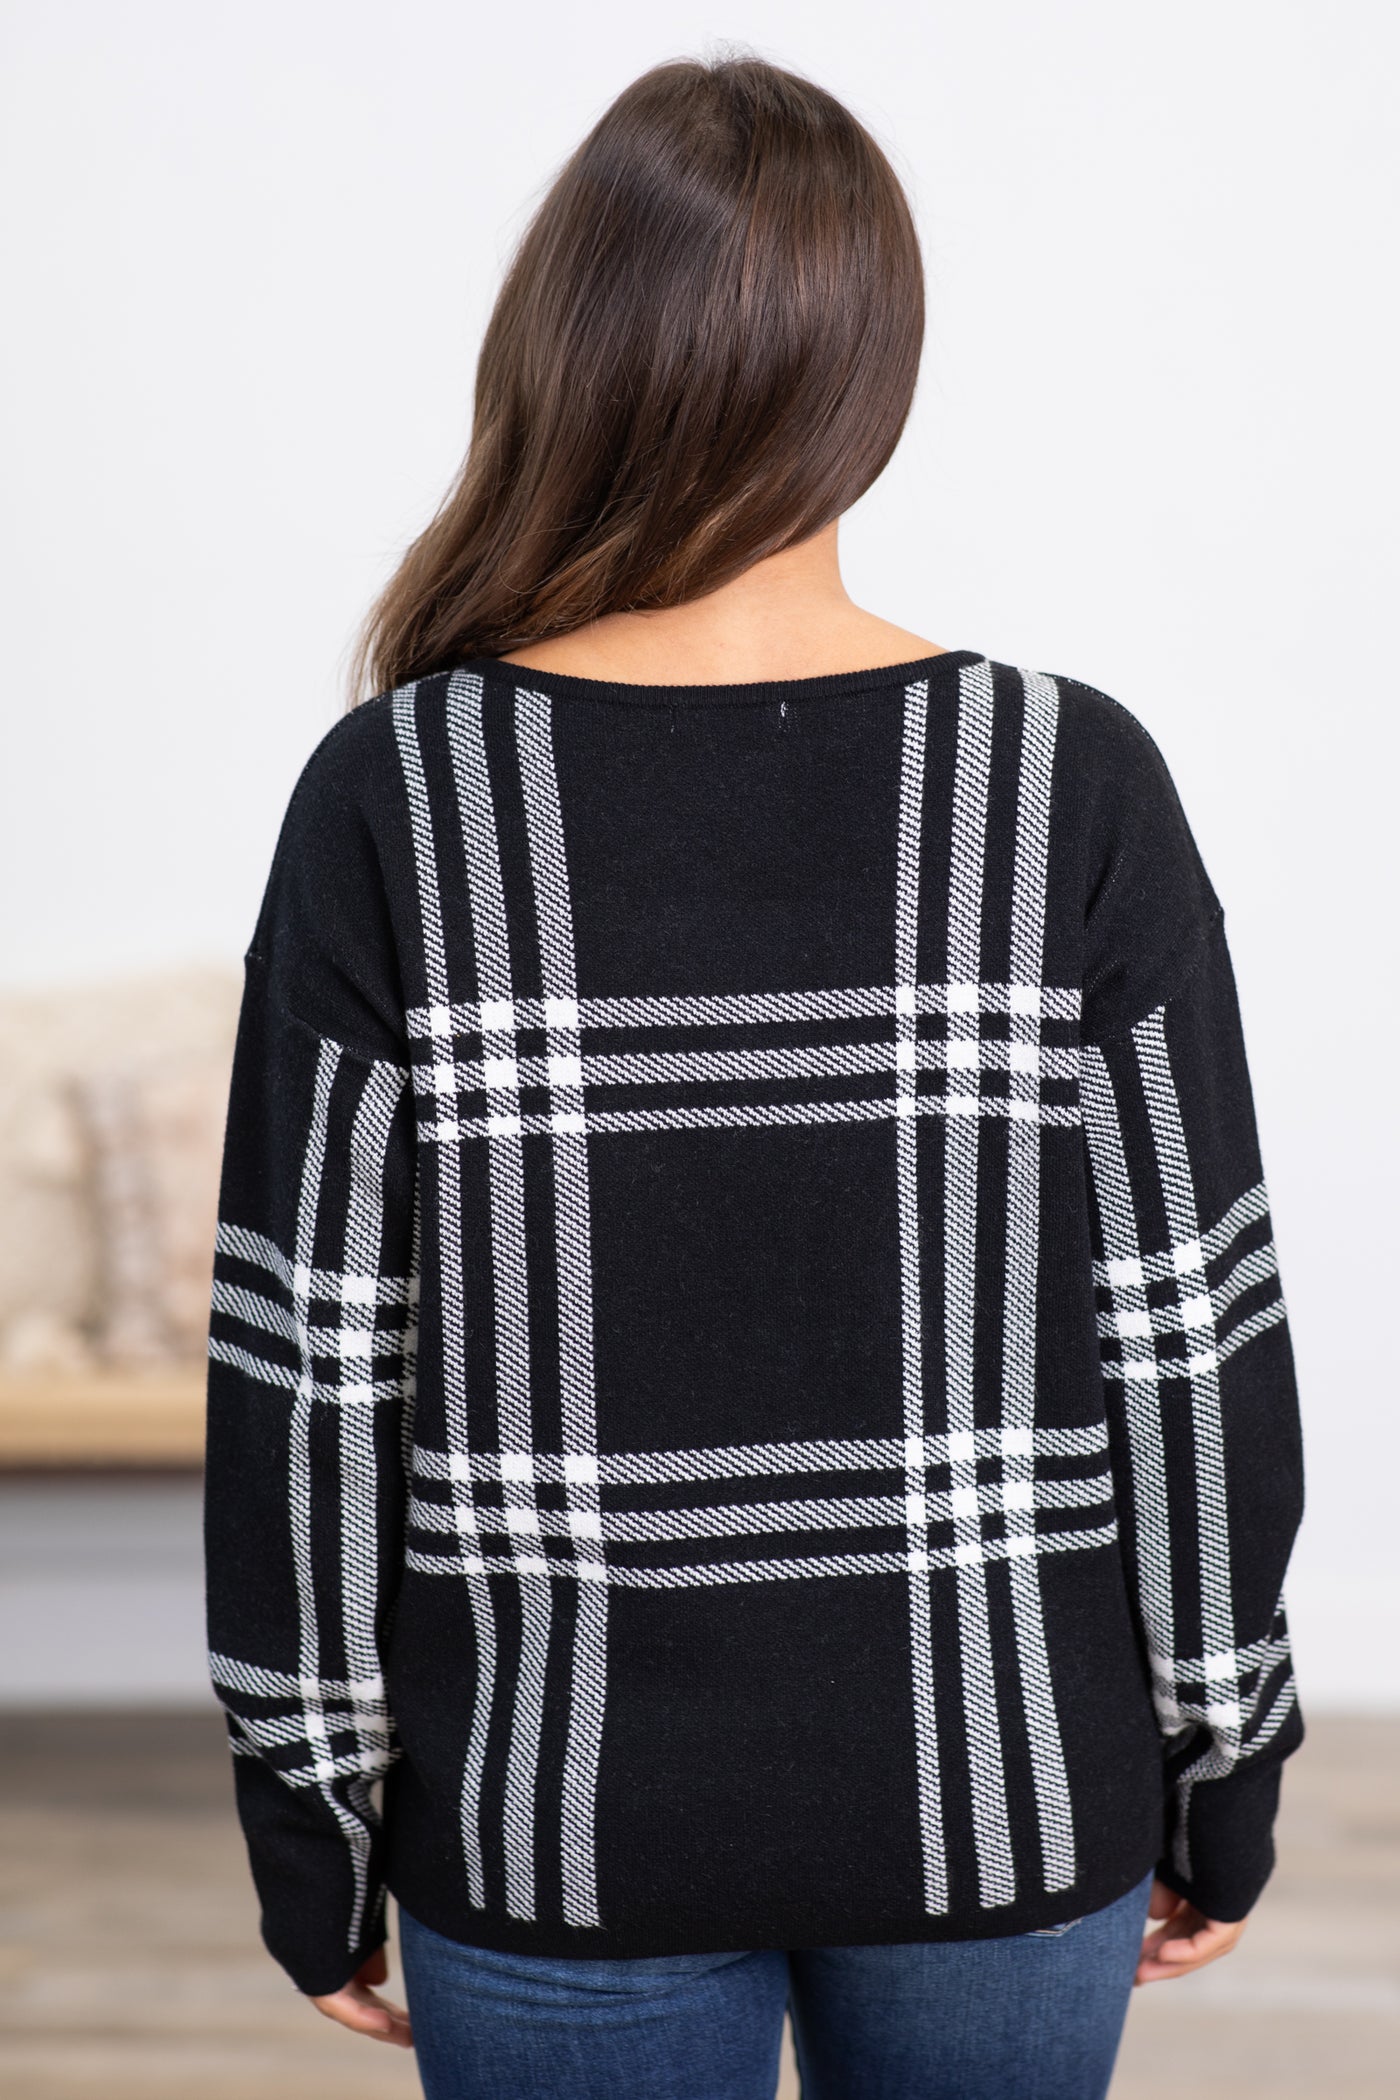 Black and Off White Plaid Sweater